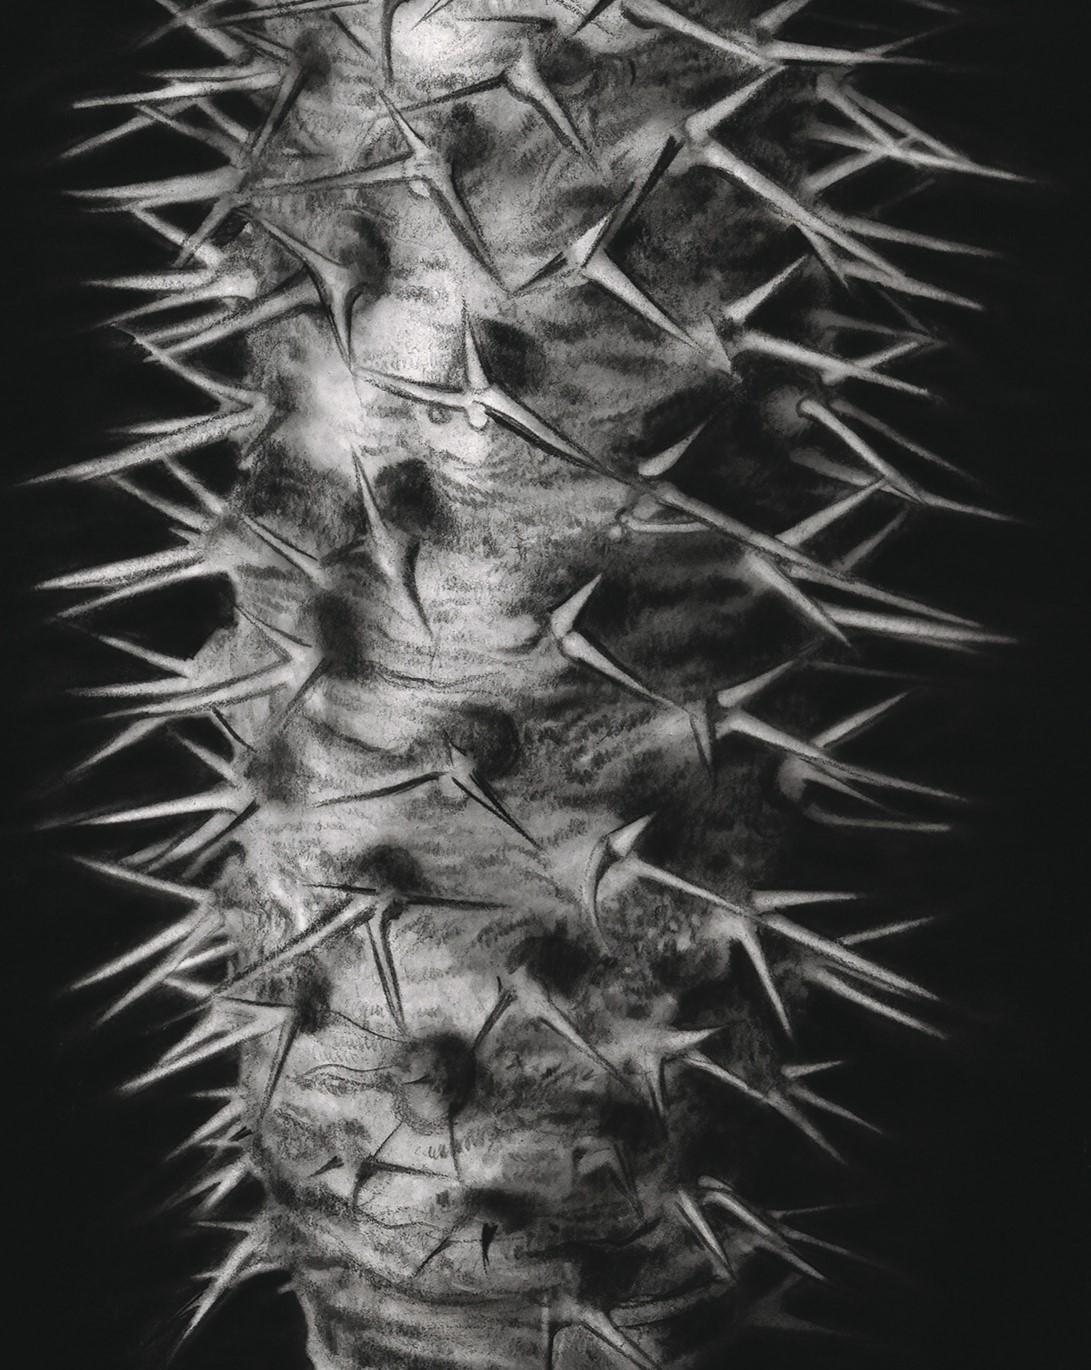 In this recent series of charcoal drawings by Henk Serfontein, Fragile Flora, he continues his investigation into the fragile, the intimate and the ethereal. In his plant portraits he captures with his microscopic eye, indigenous plants with exposed